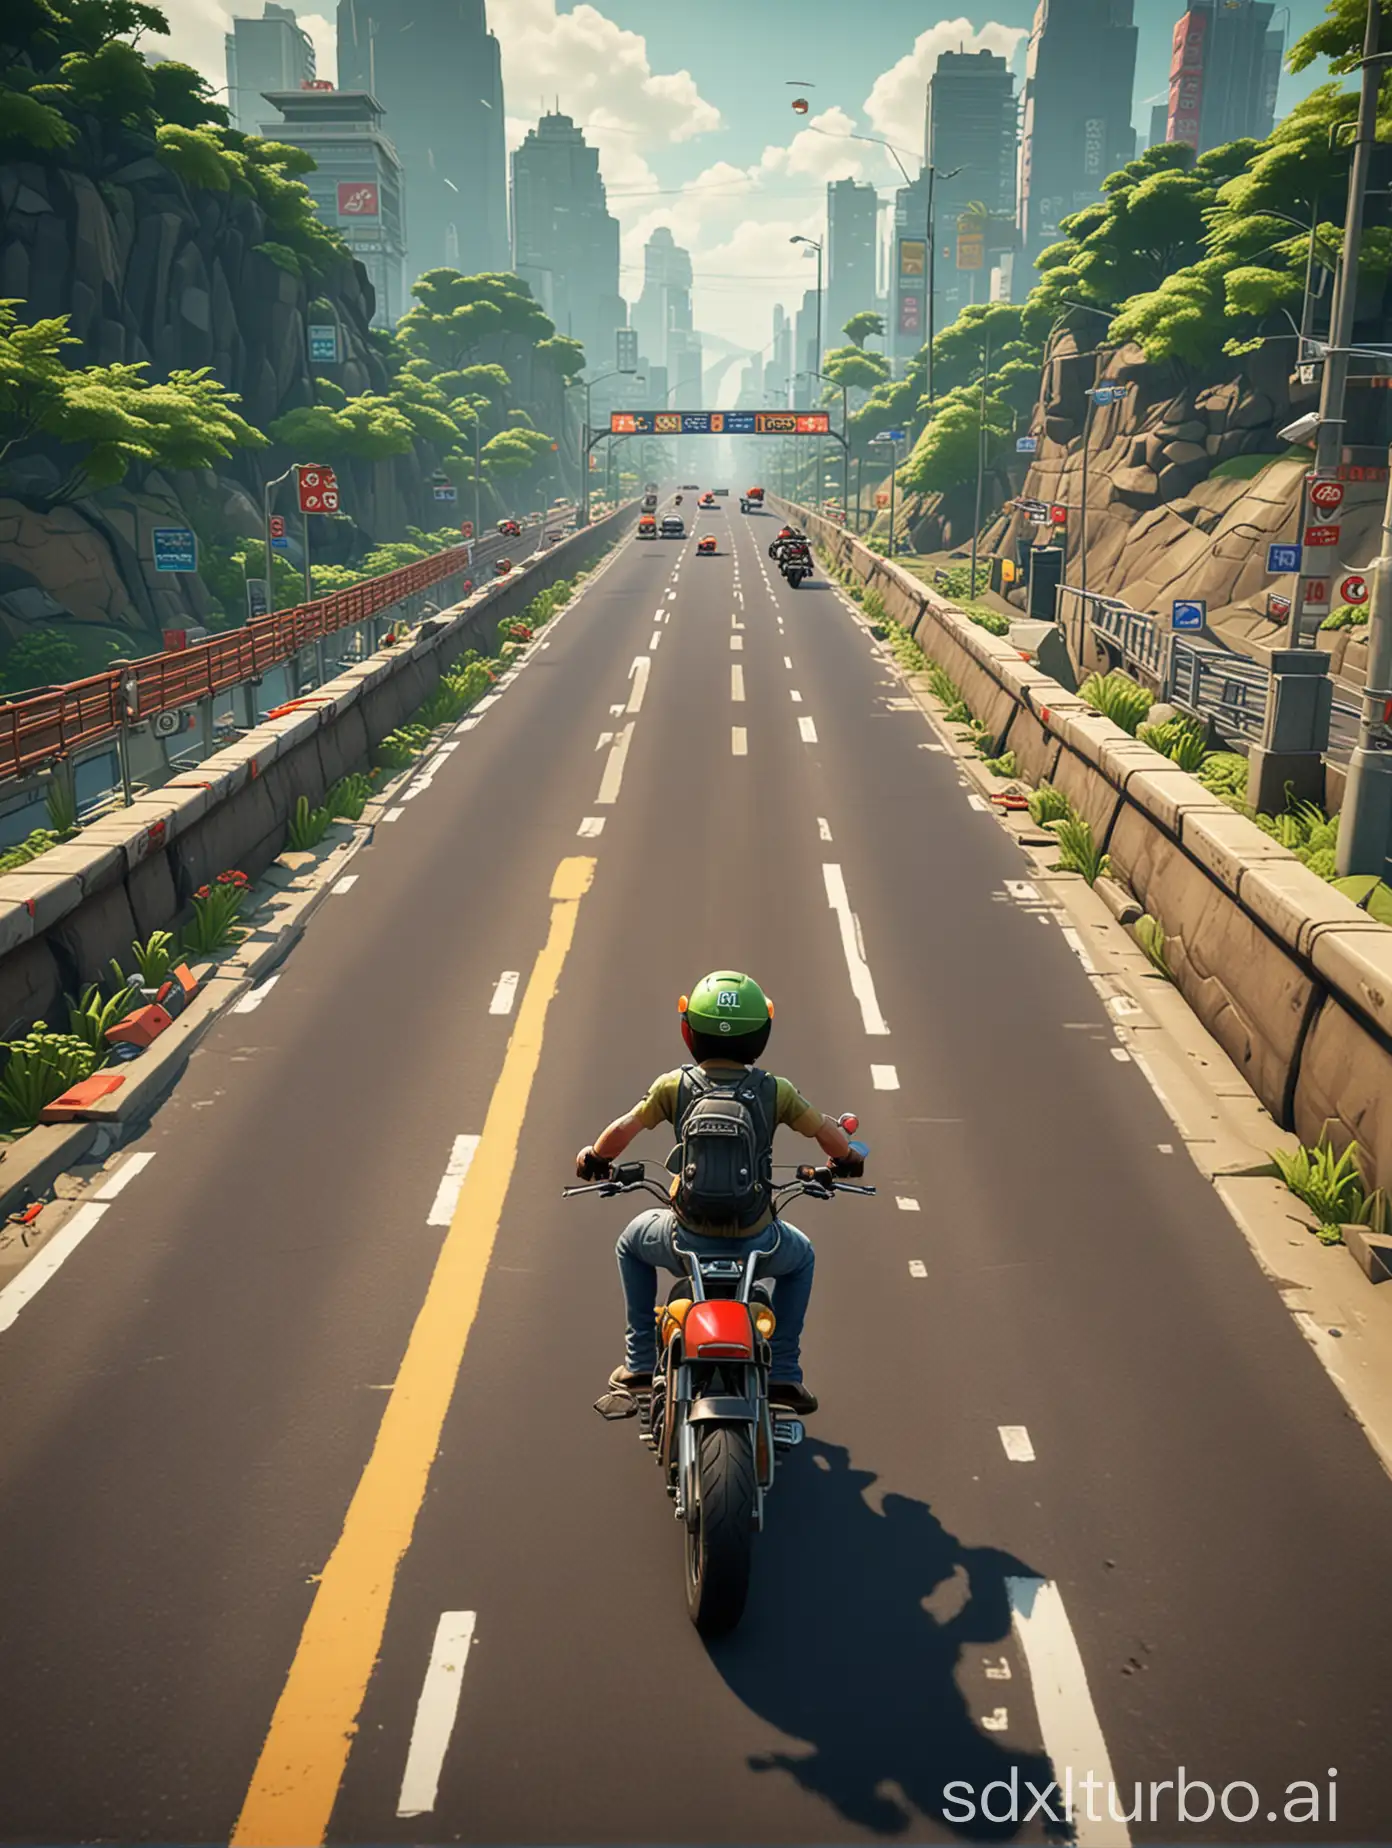 Motorcycle-Ride-Through-Taiwan-Low-Poly-3D-Highway-Adventure